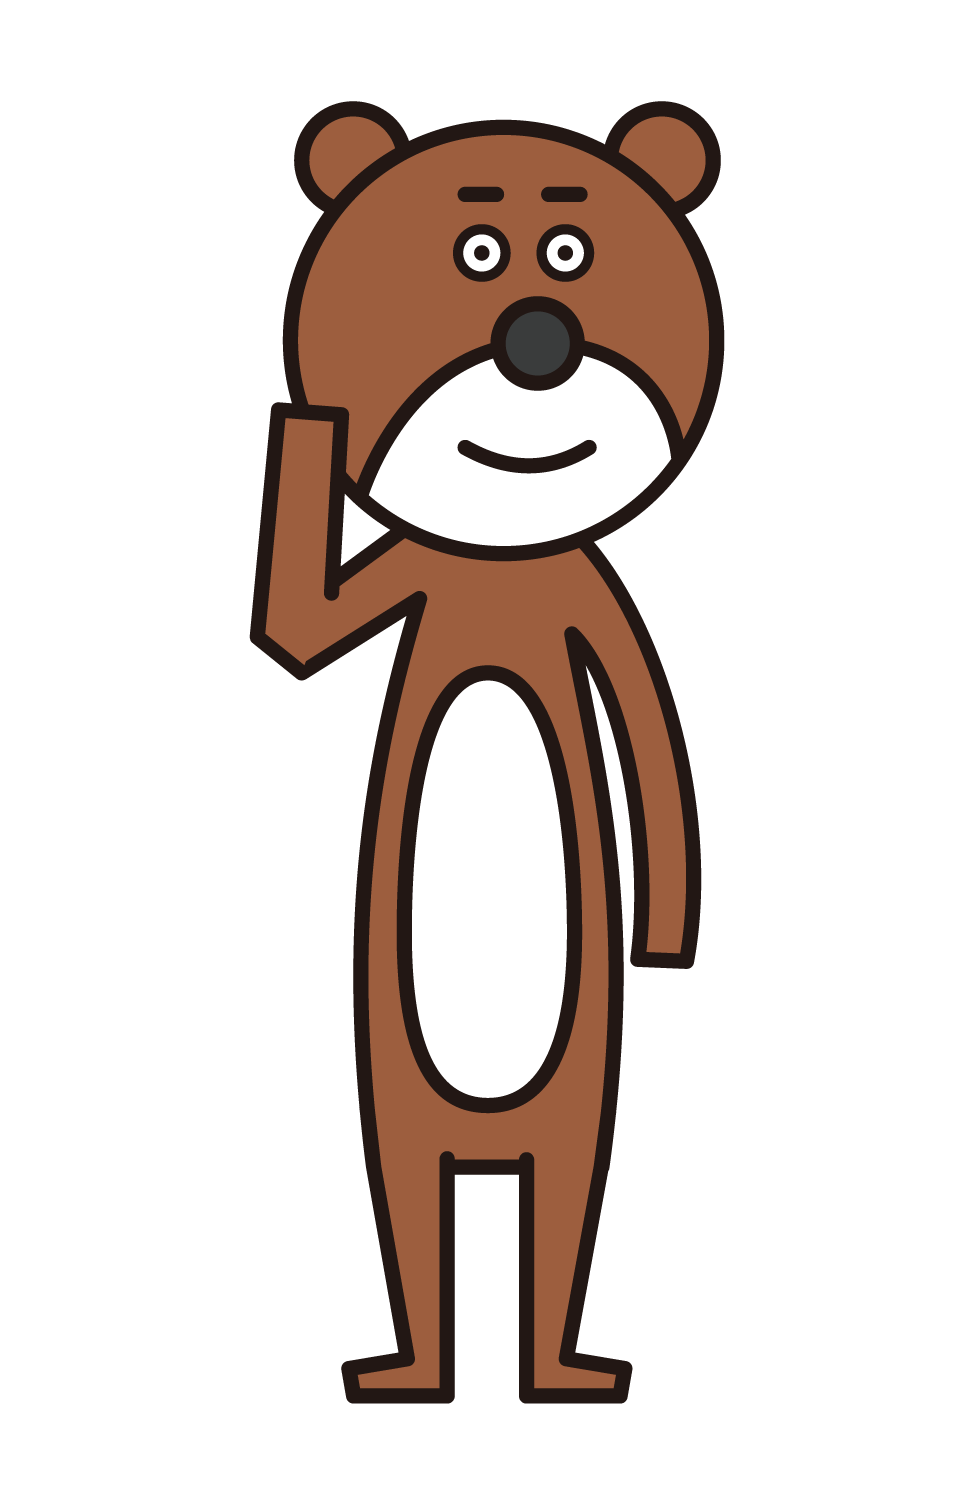 Illustration of a person wearing a bear costume